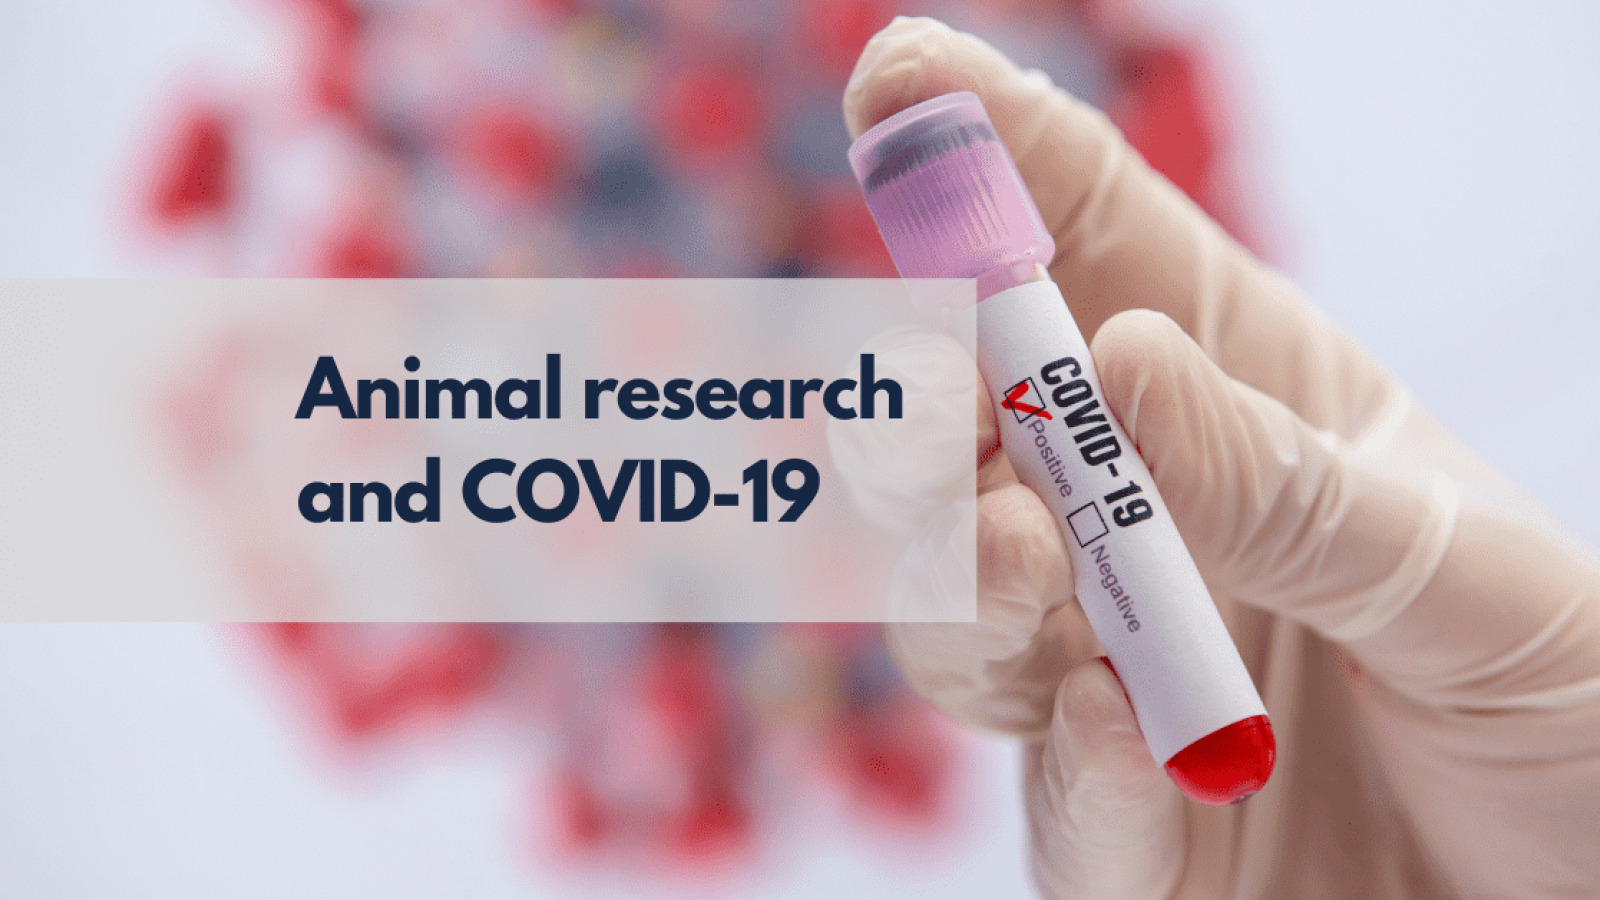 Animal research and COVID-19